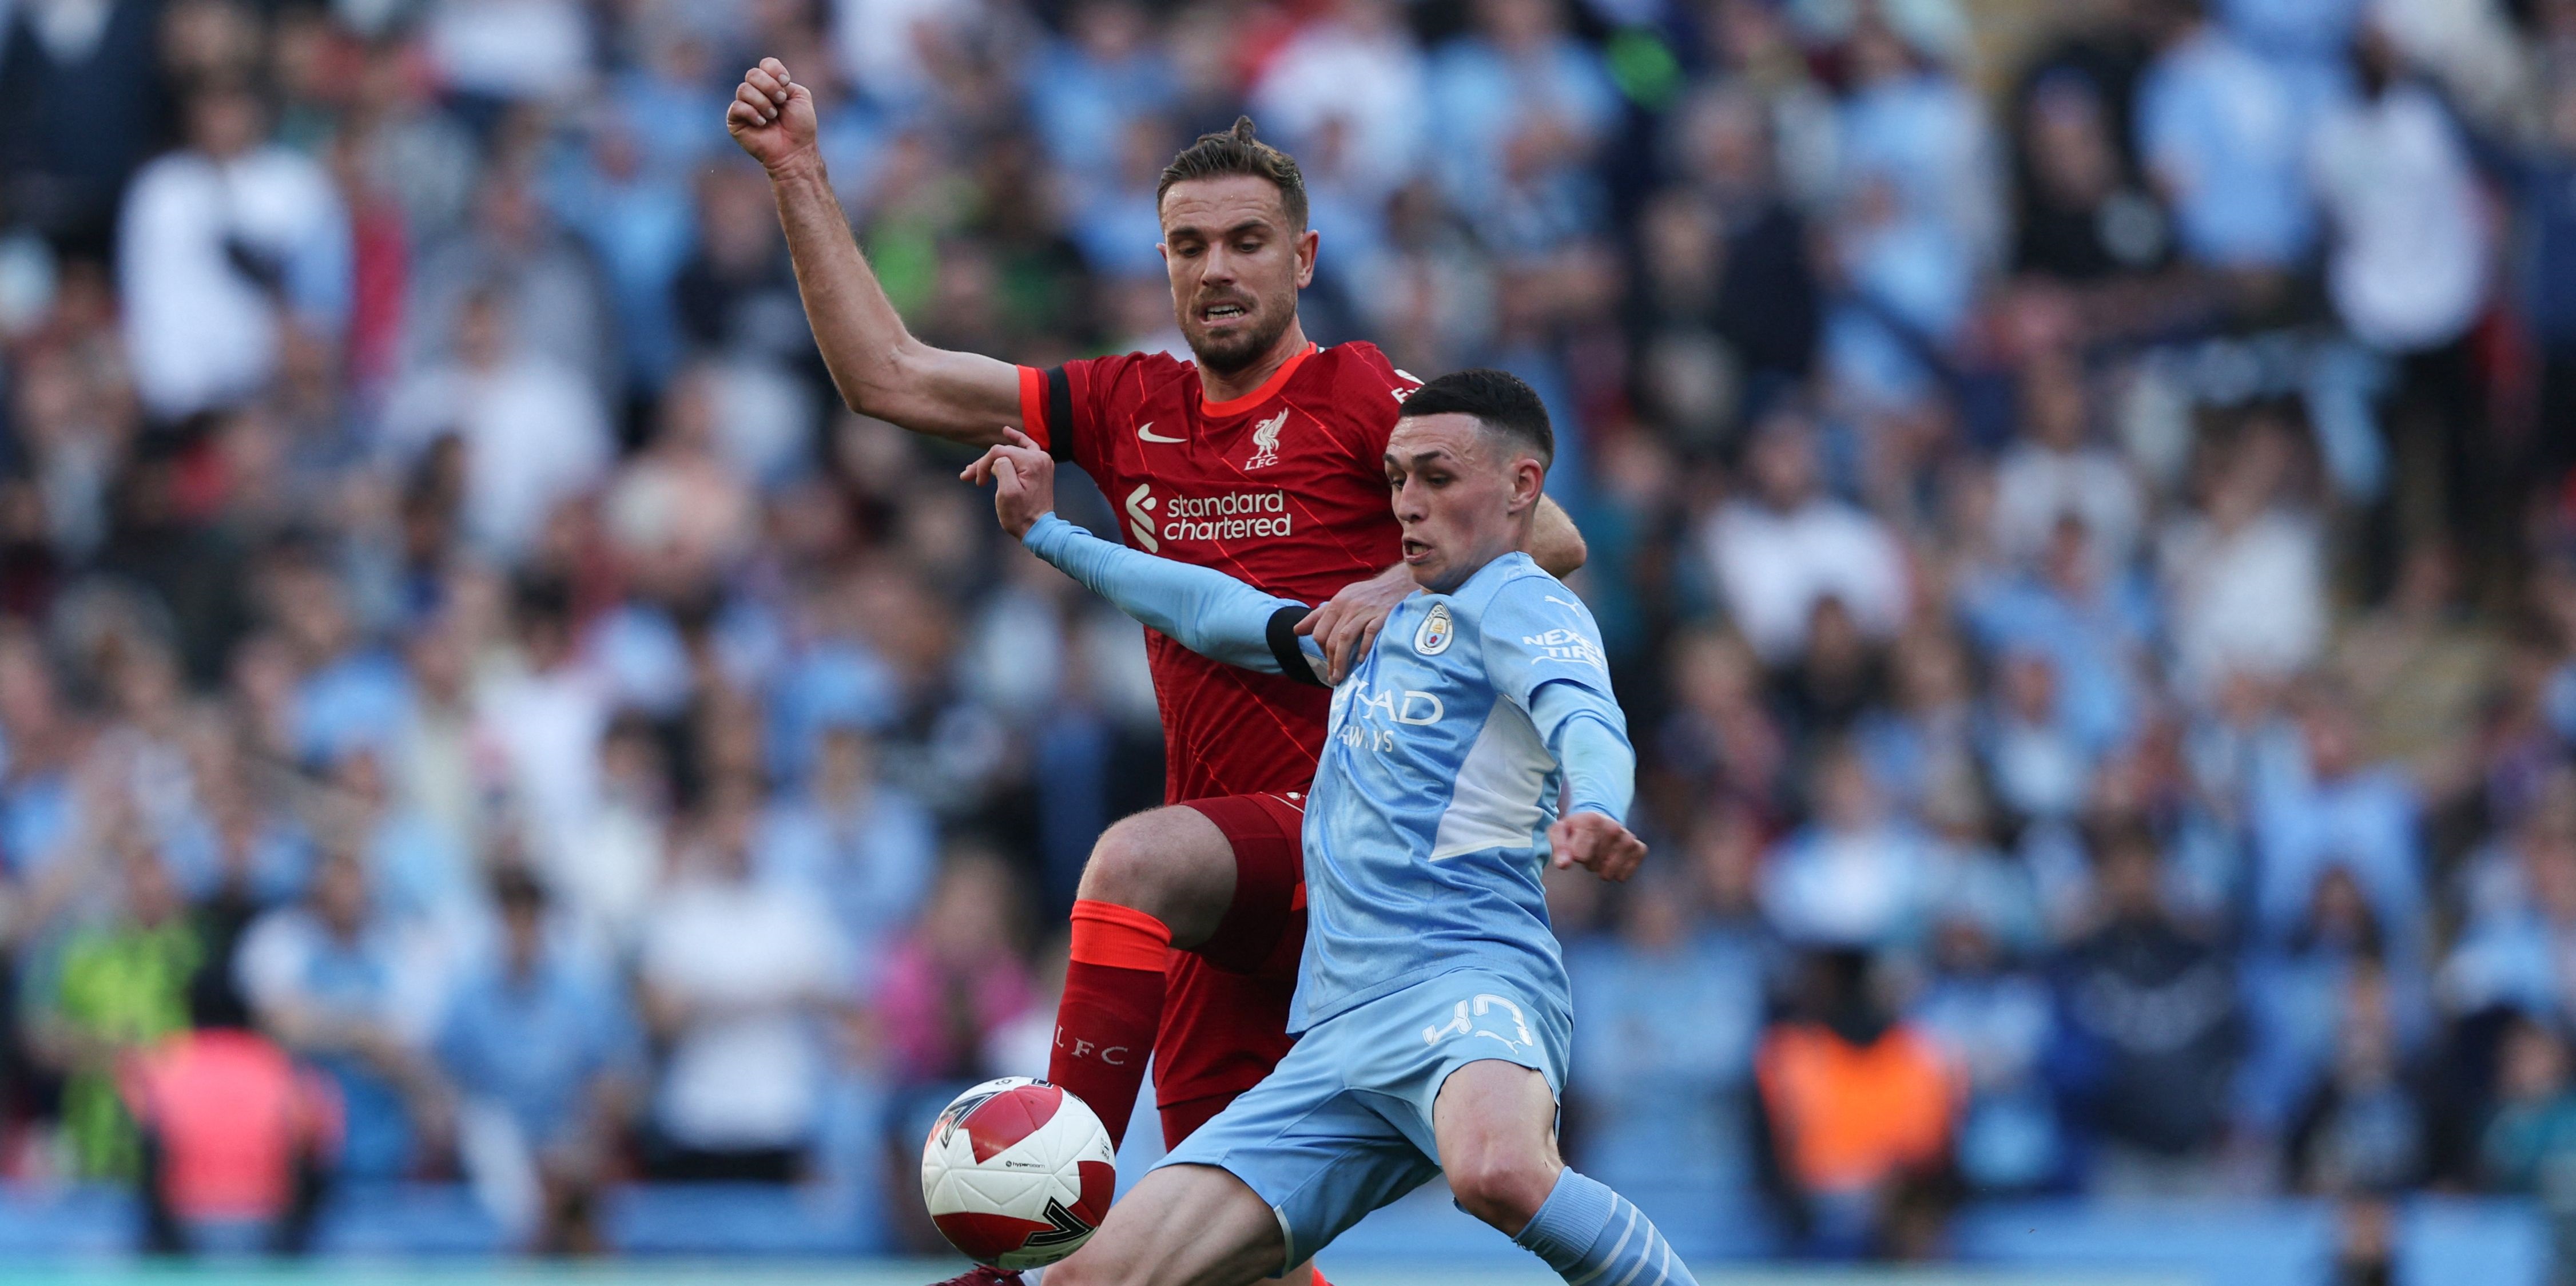 Man City can help Liverpool with quadruple charge after Henderson hits nail on the head about Guardiola’s men